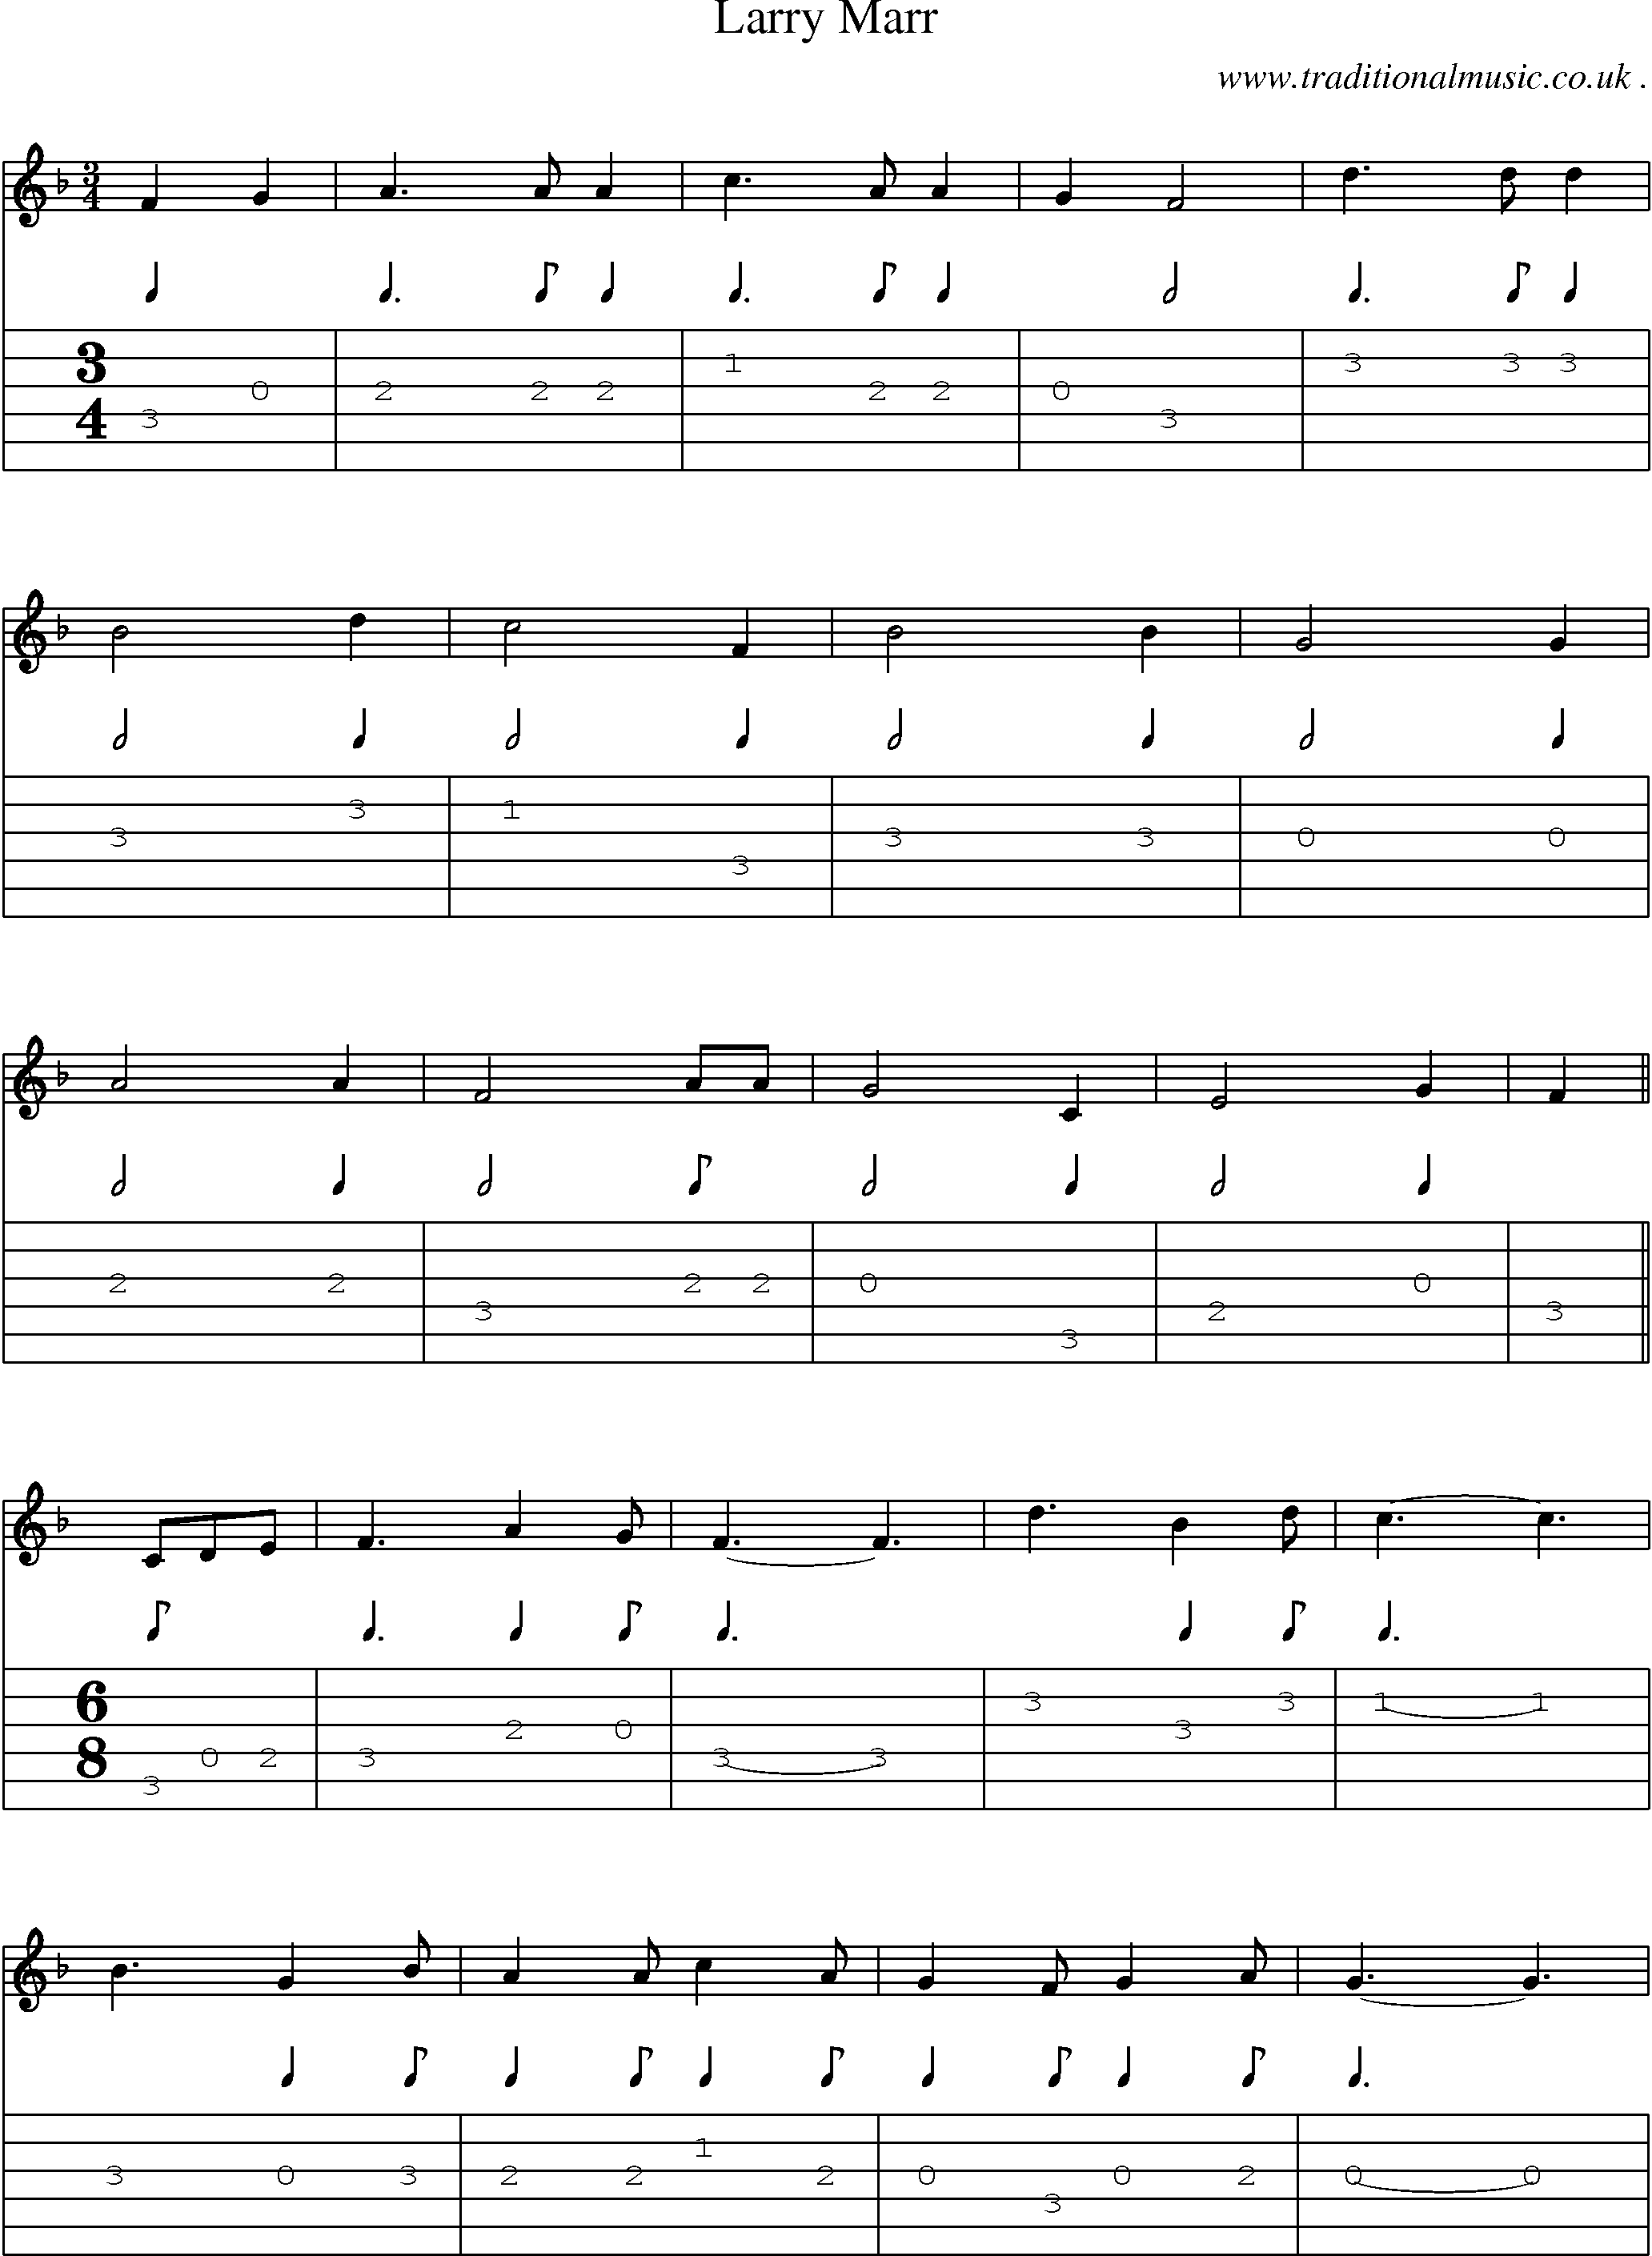 Sheet-Music and Guitar Tabs for Larry Marr